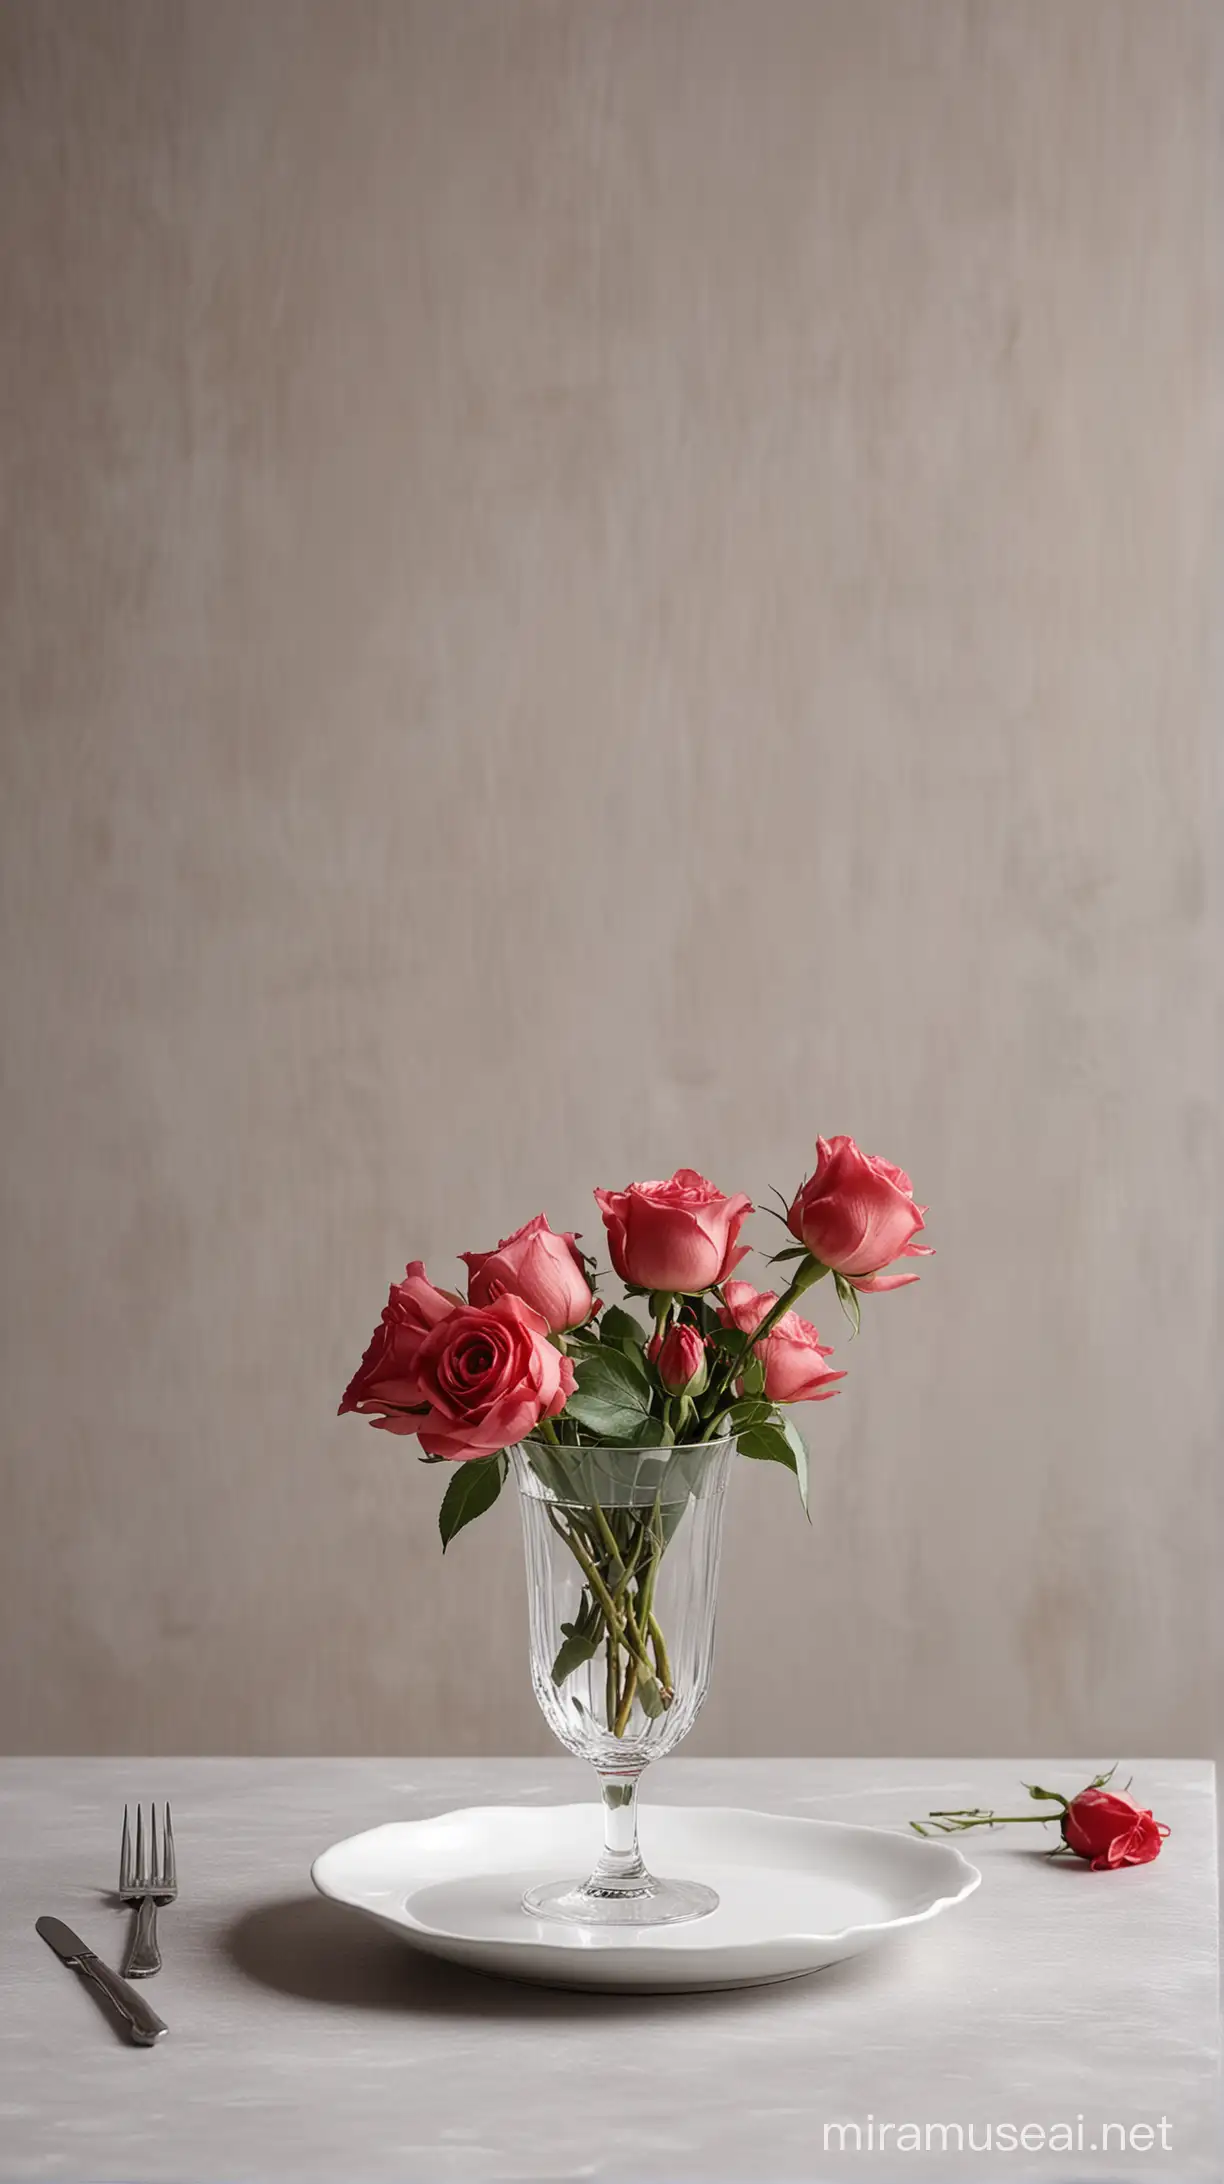 a glass of red wine on the table, an empty white plate on the table, delicate roses in a vase on the table, light background, minimalist style, close-up